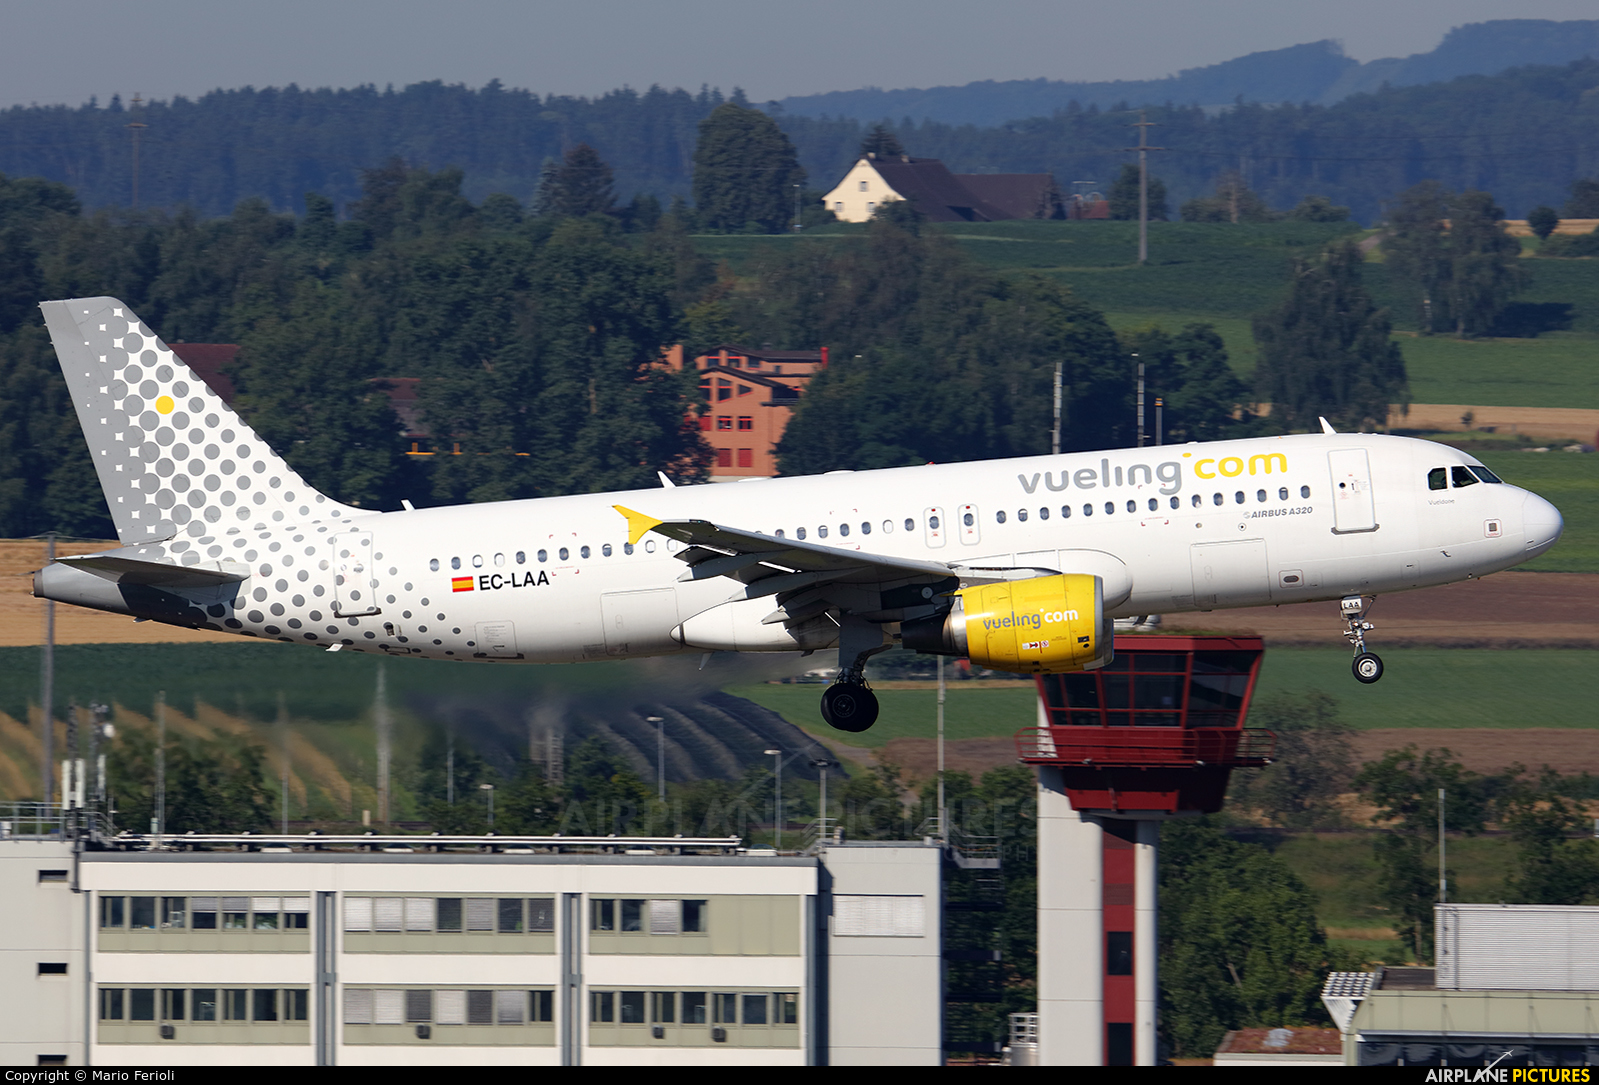 Vueling Airlines EC-LAA aircraft at Zurich